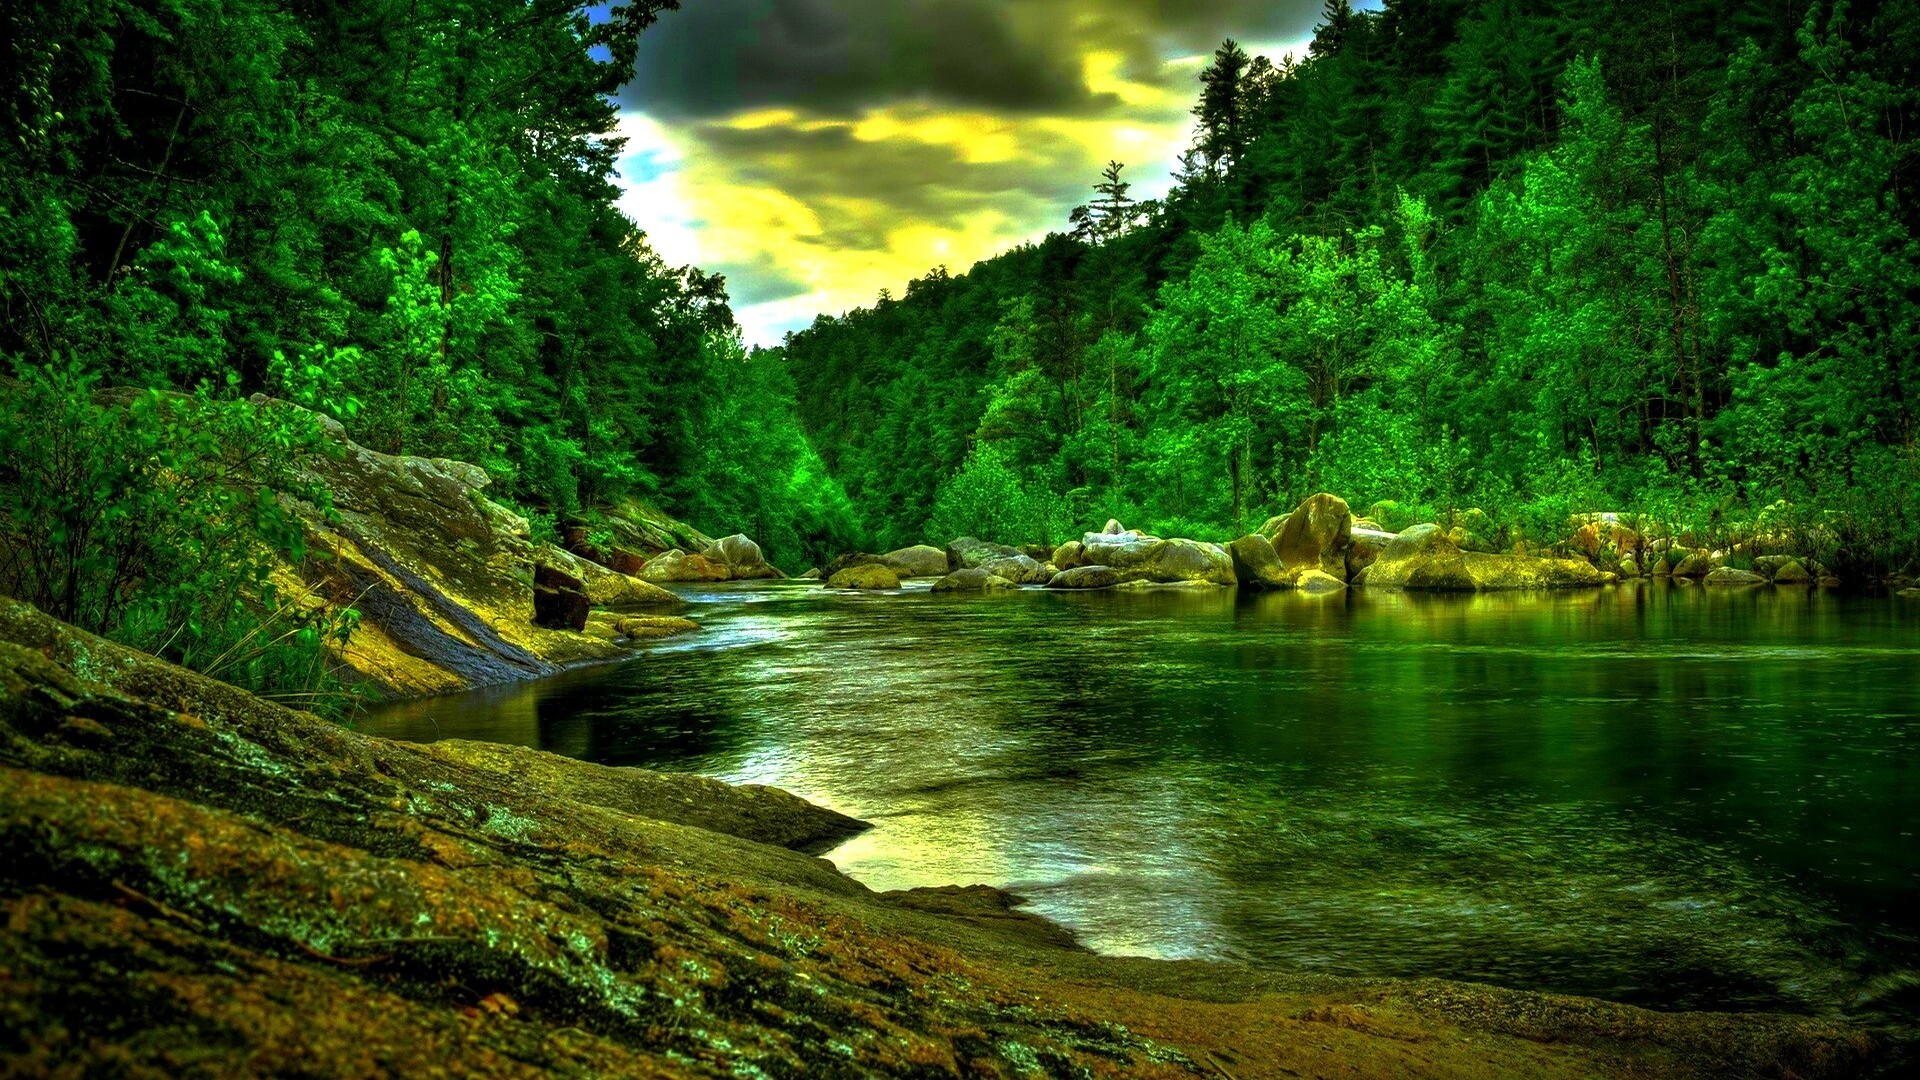 Go Green: Forest river, A clean and green environment, The beauty of nature. 1920x1080 Full HD Wallpaper.